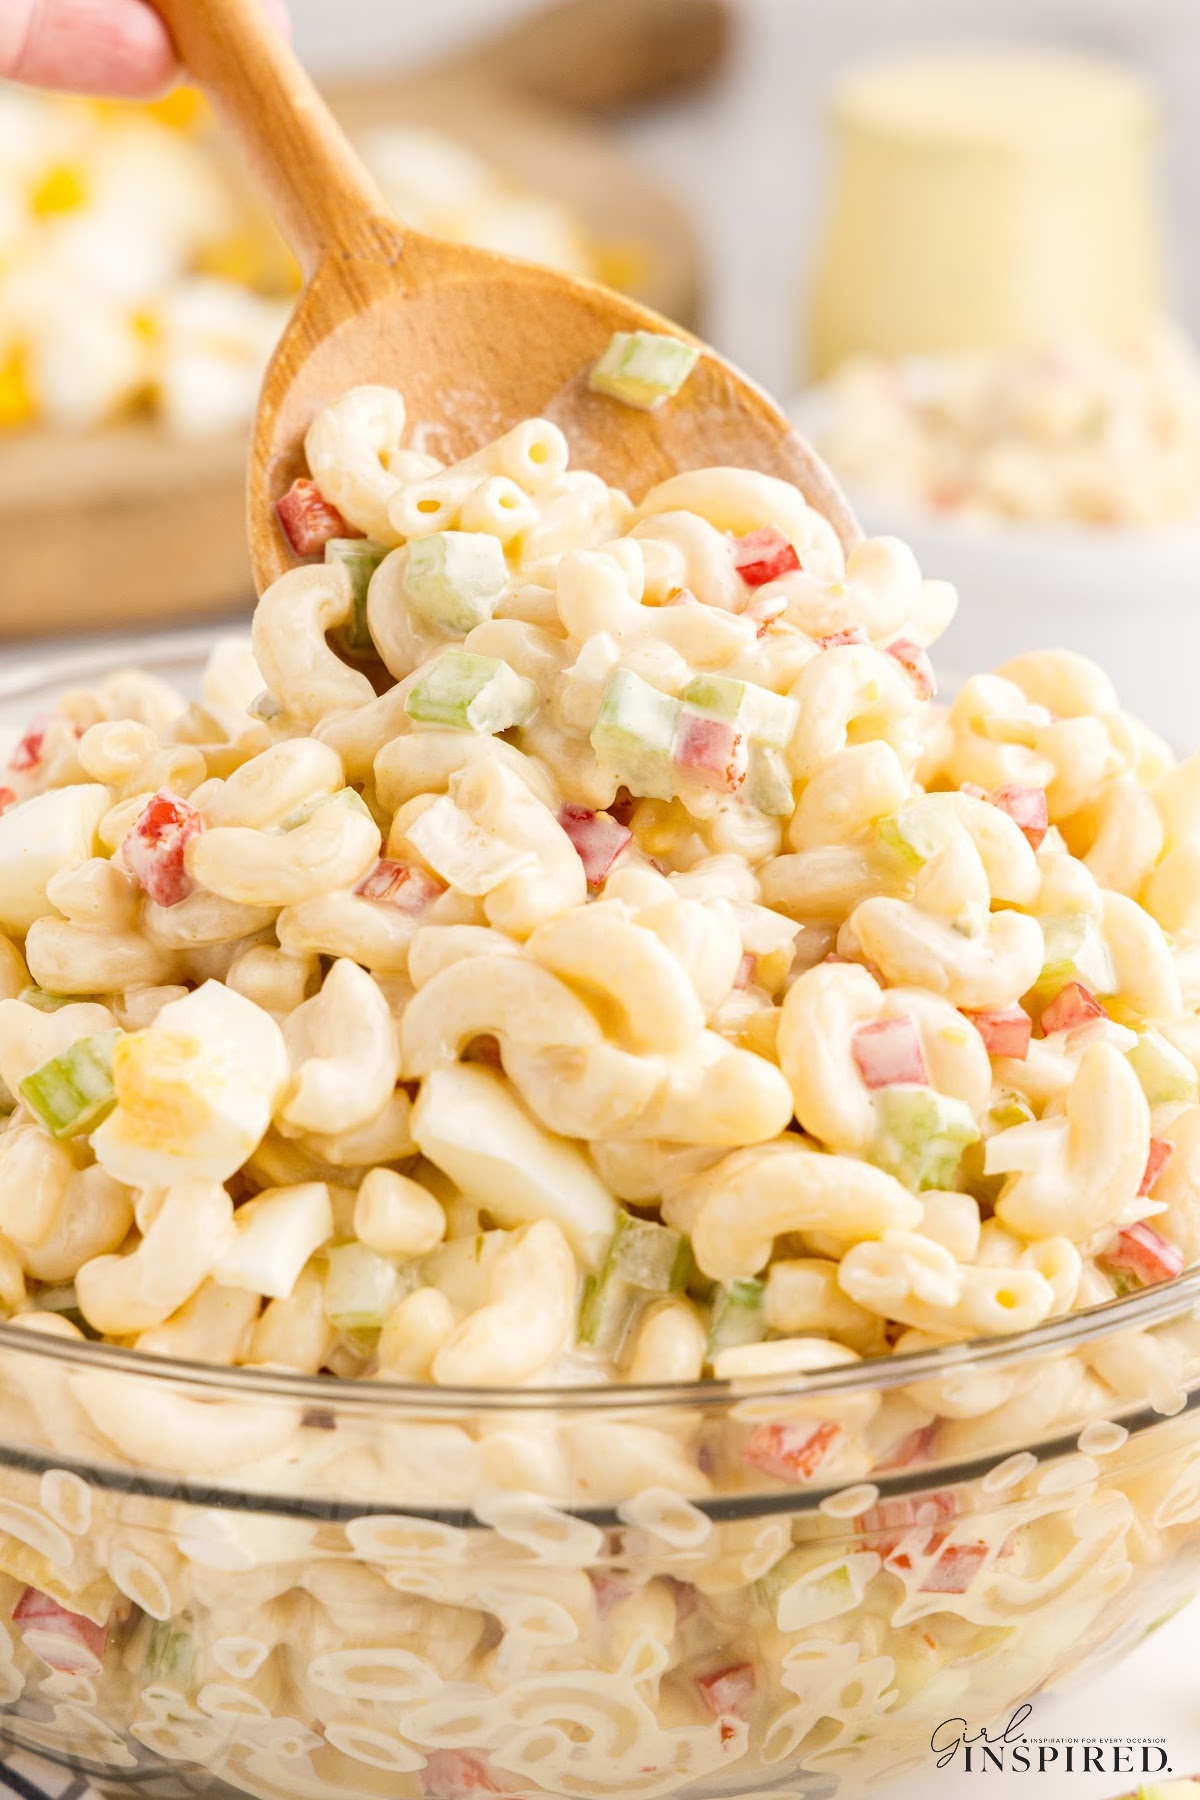 A dish of Amish Macaroni Salad with a wooden spoon scooping up some.